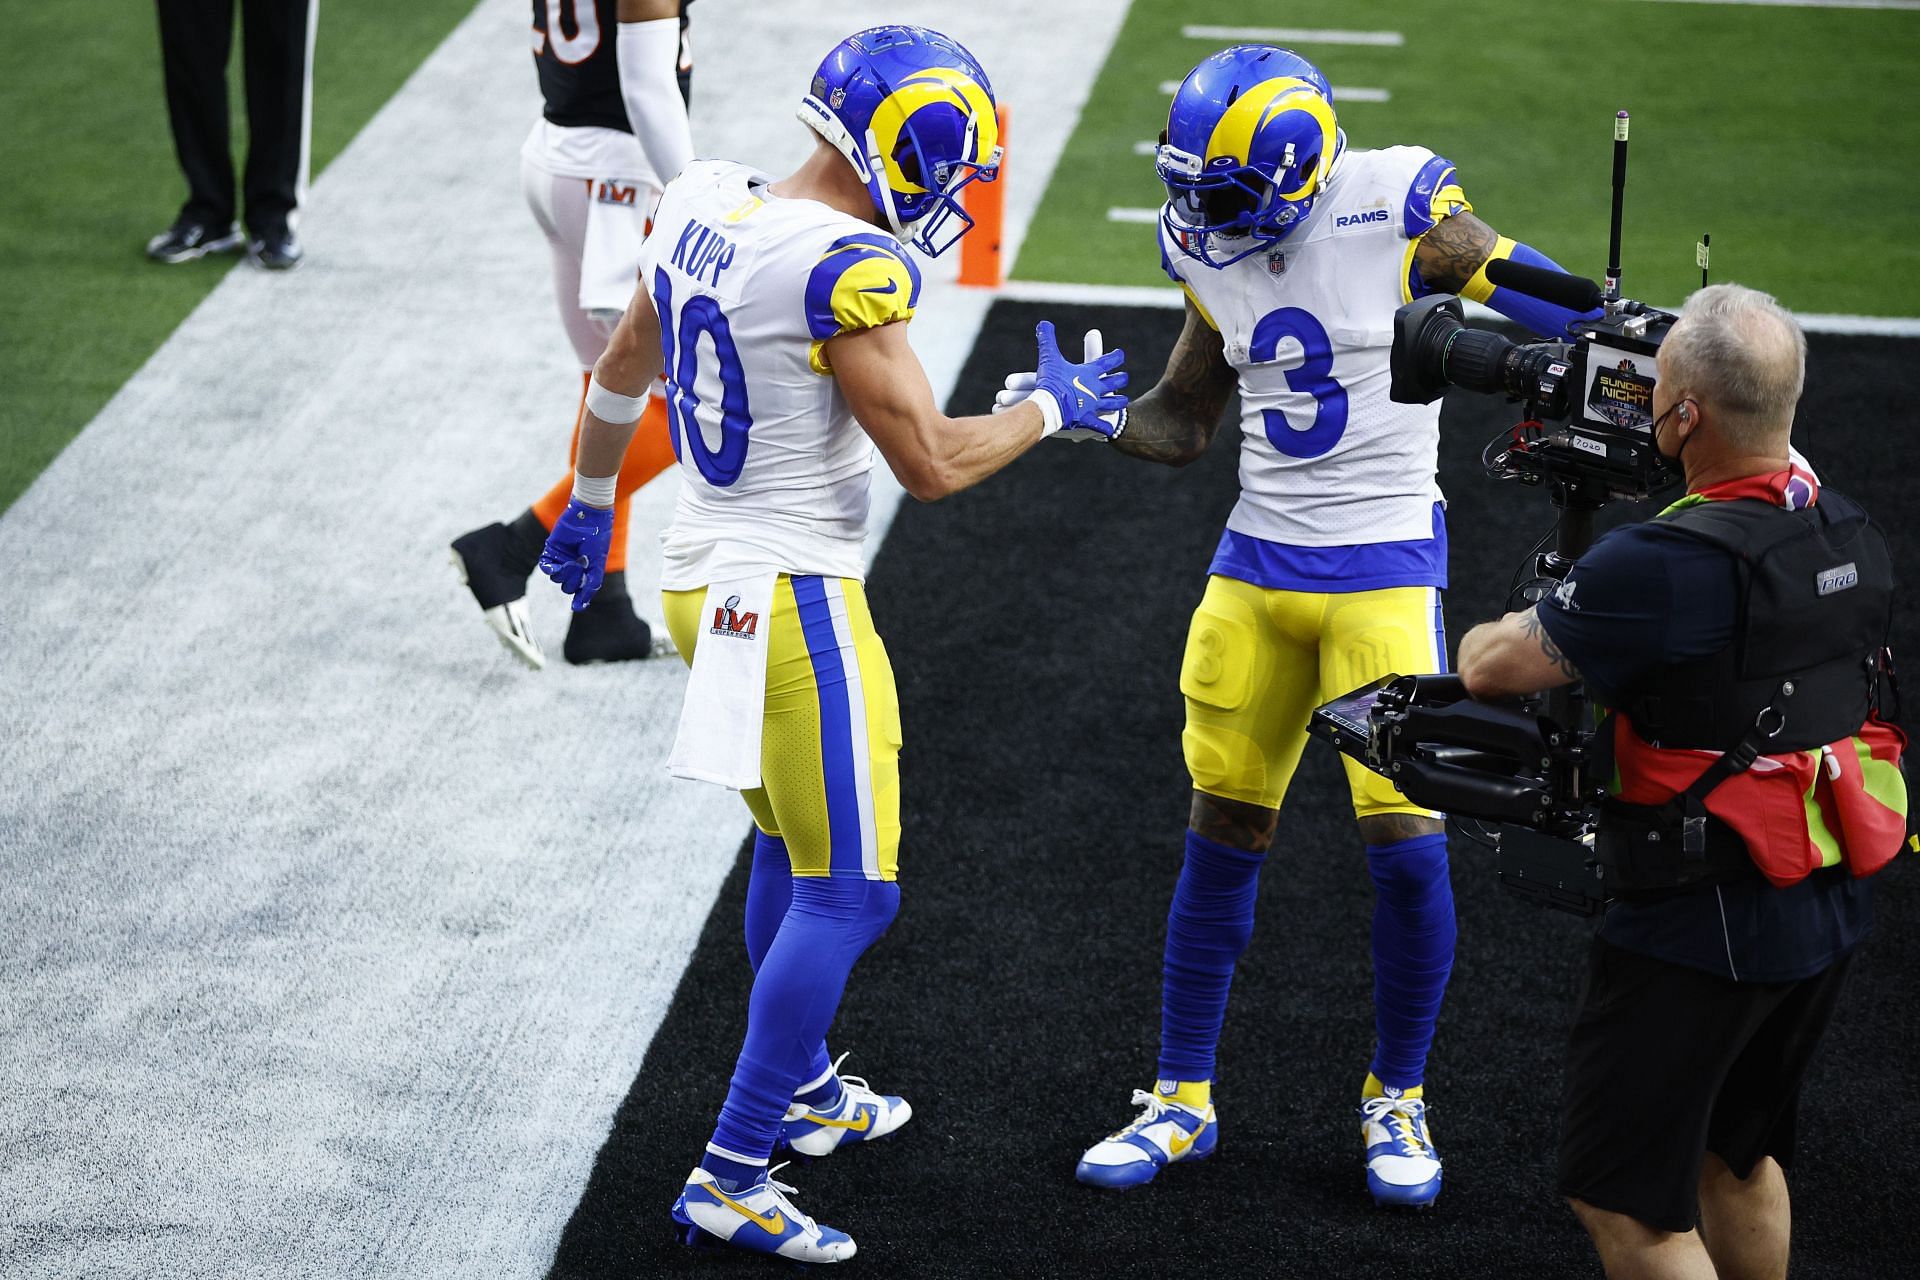 Stat shows just how lethal Rams trio of Matthew Stafford, Cooper Kupp and Odell Beckham Jr. were in postseason